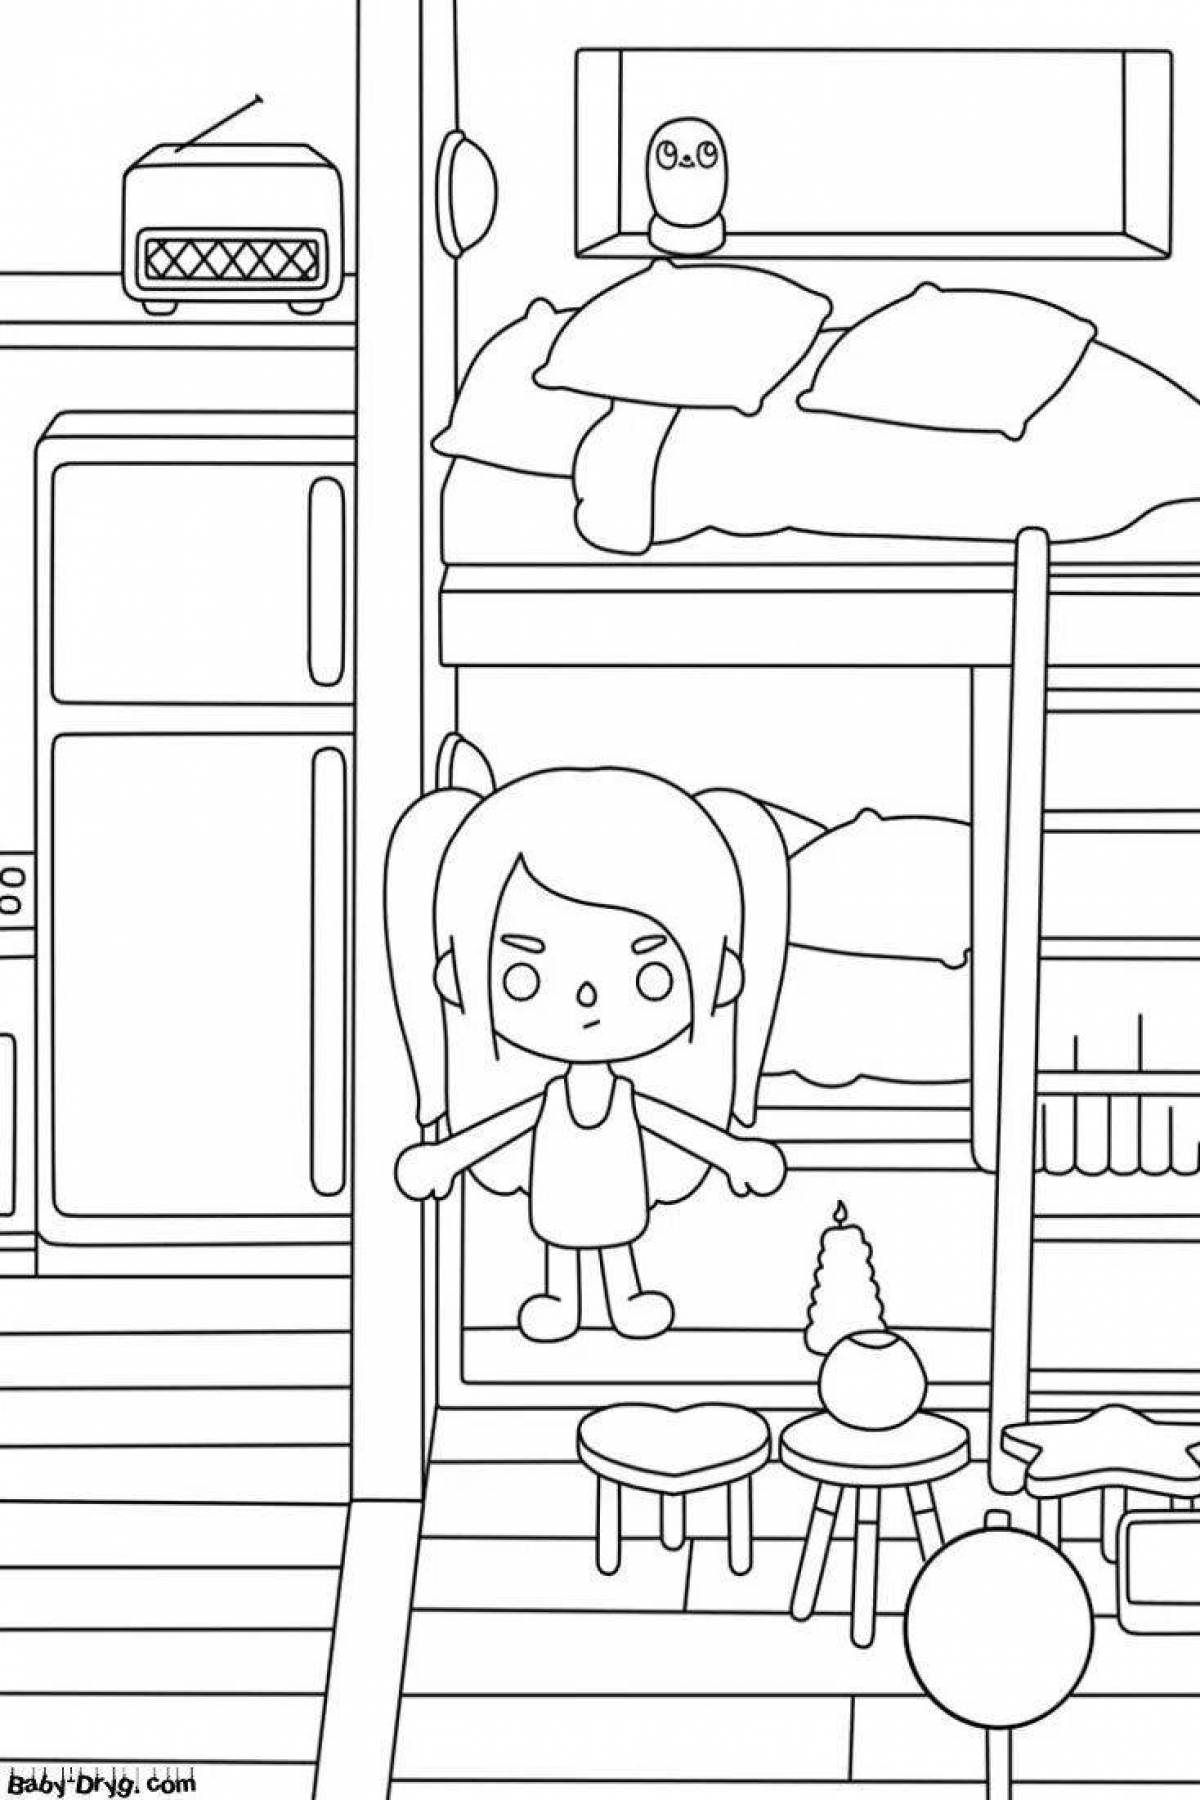 Toko boko things amazing coloring pages